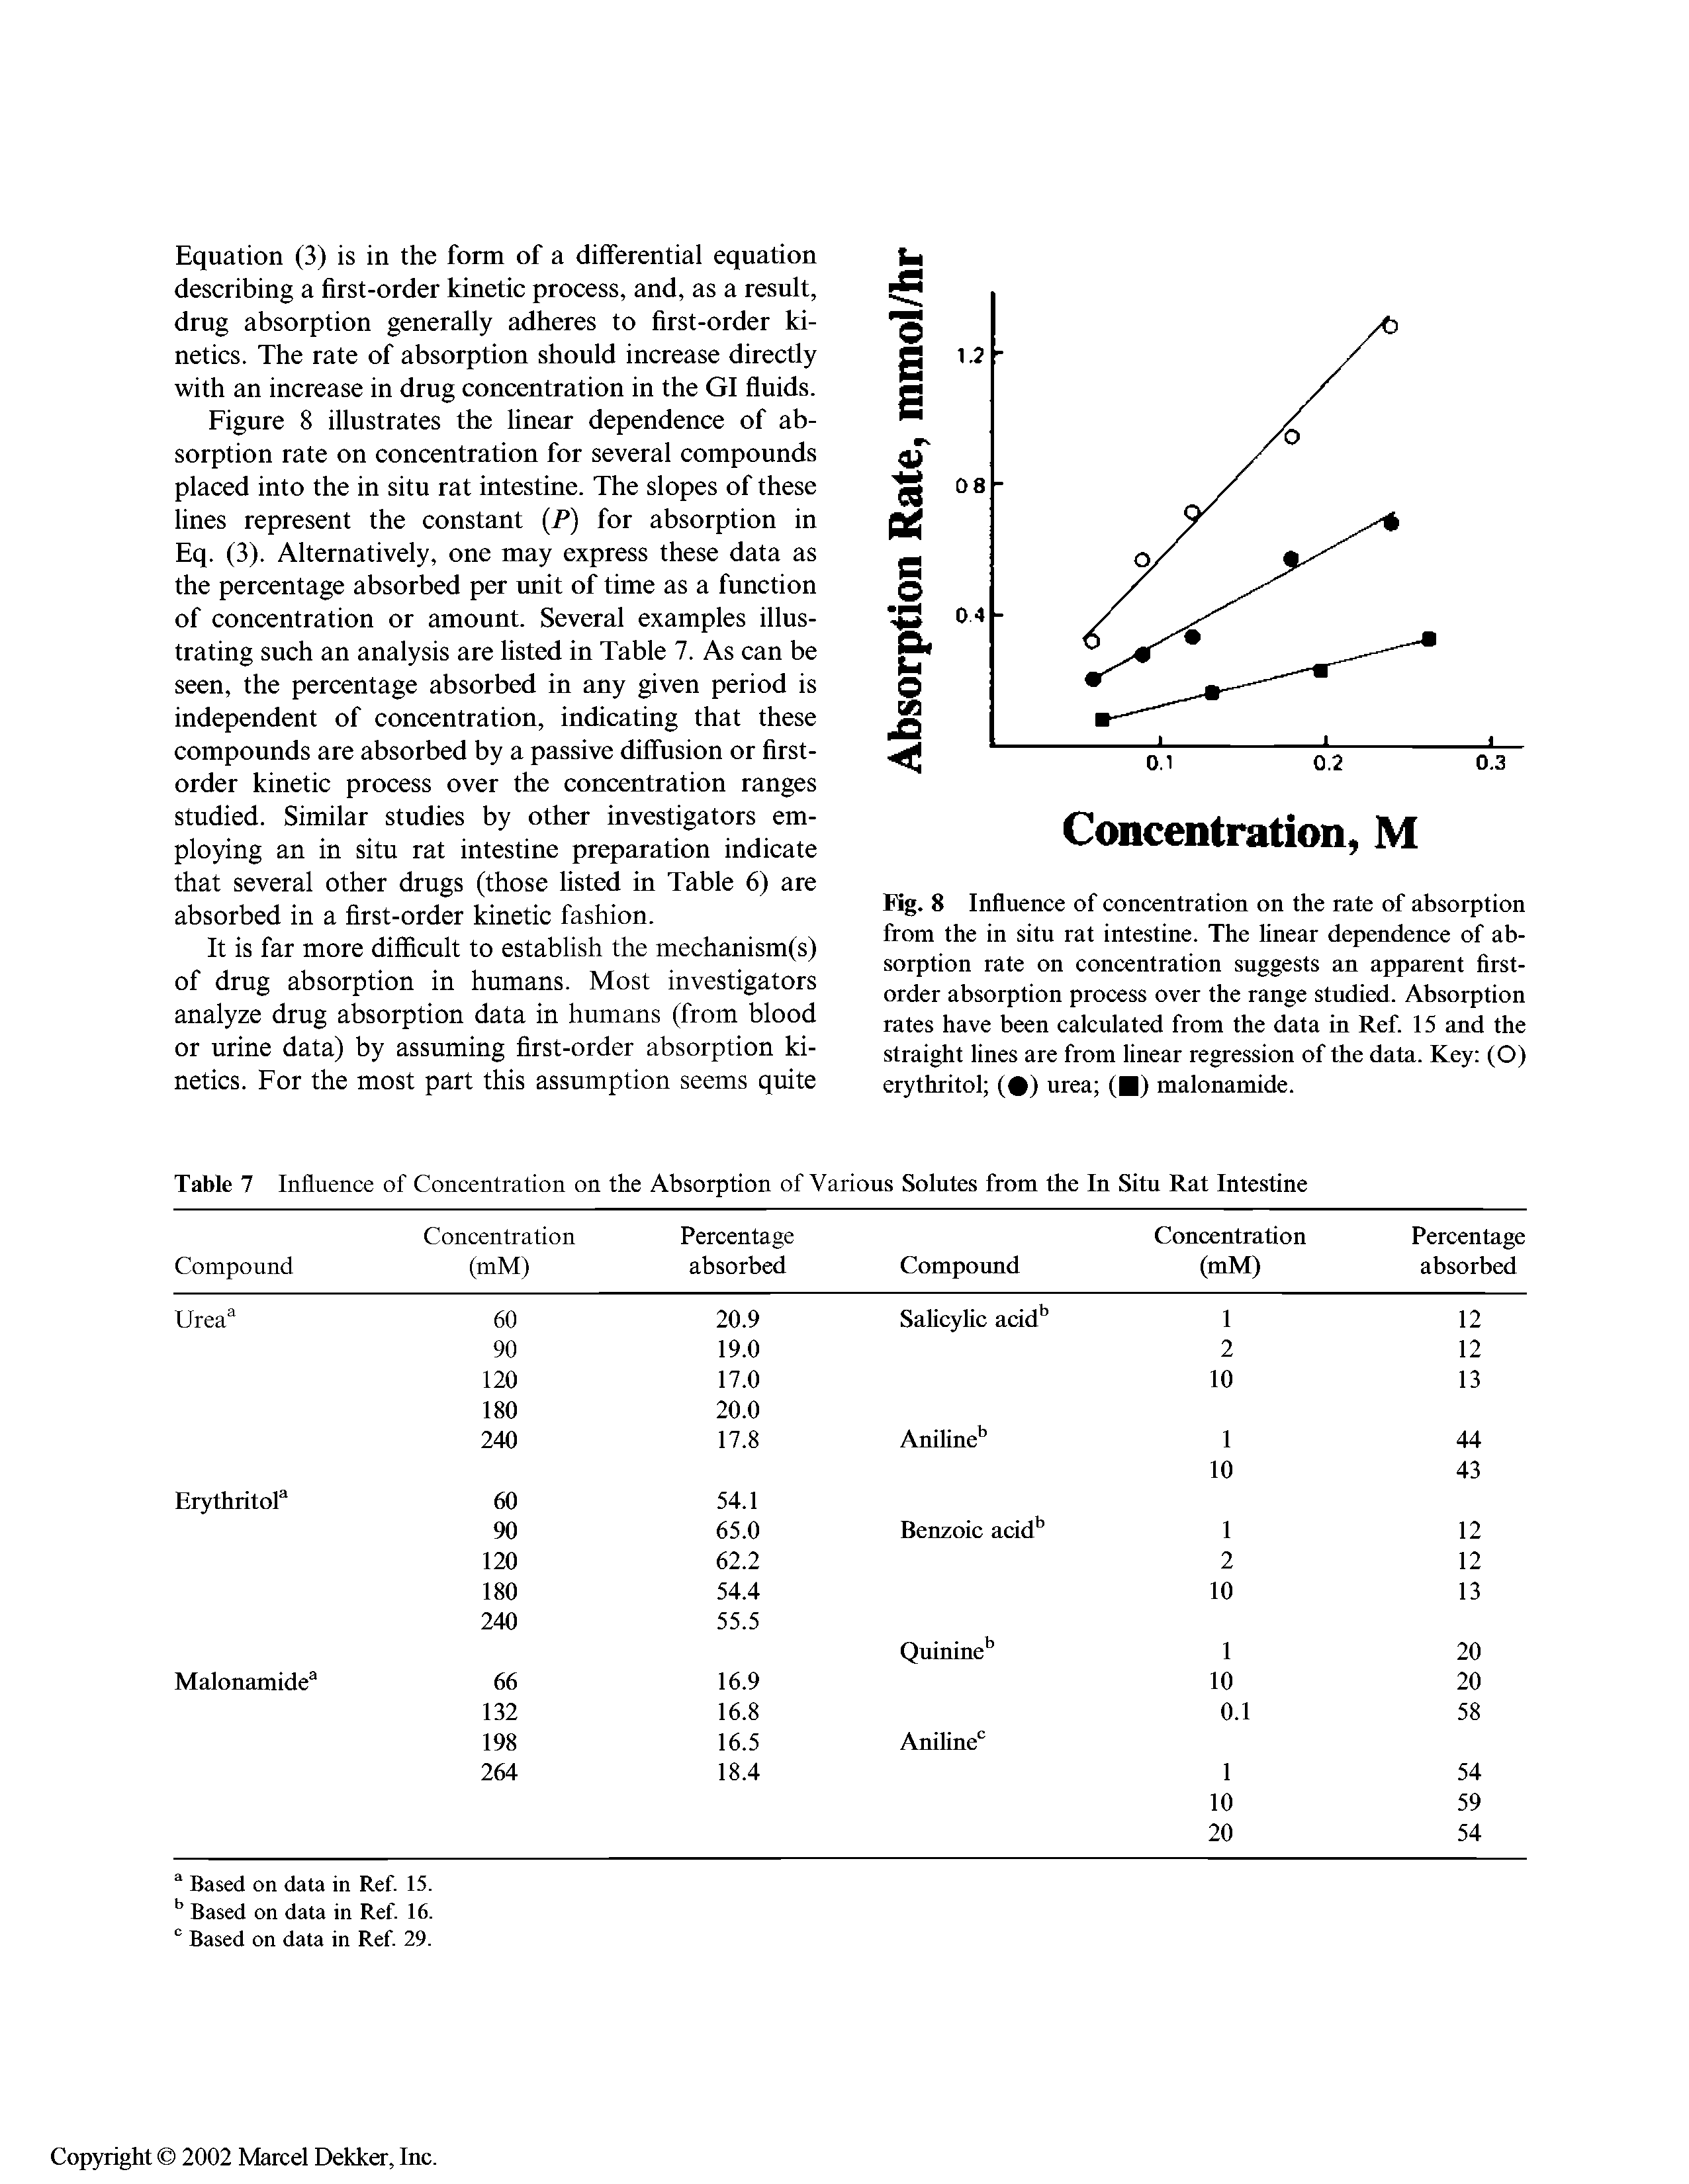 Fig. 8 Influence of concentration on the rate of absorption from the in situ rat intestine. The linear dependence of absorption rate on concentration suggests an apparent first-order absorption process over the range studied. Absorption rates have been calculated from the data in Ref. 15 and the straight lines are from linear regression of the data. Key (O) erythritol ( ) urea ( ) malonamide.